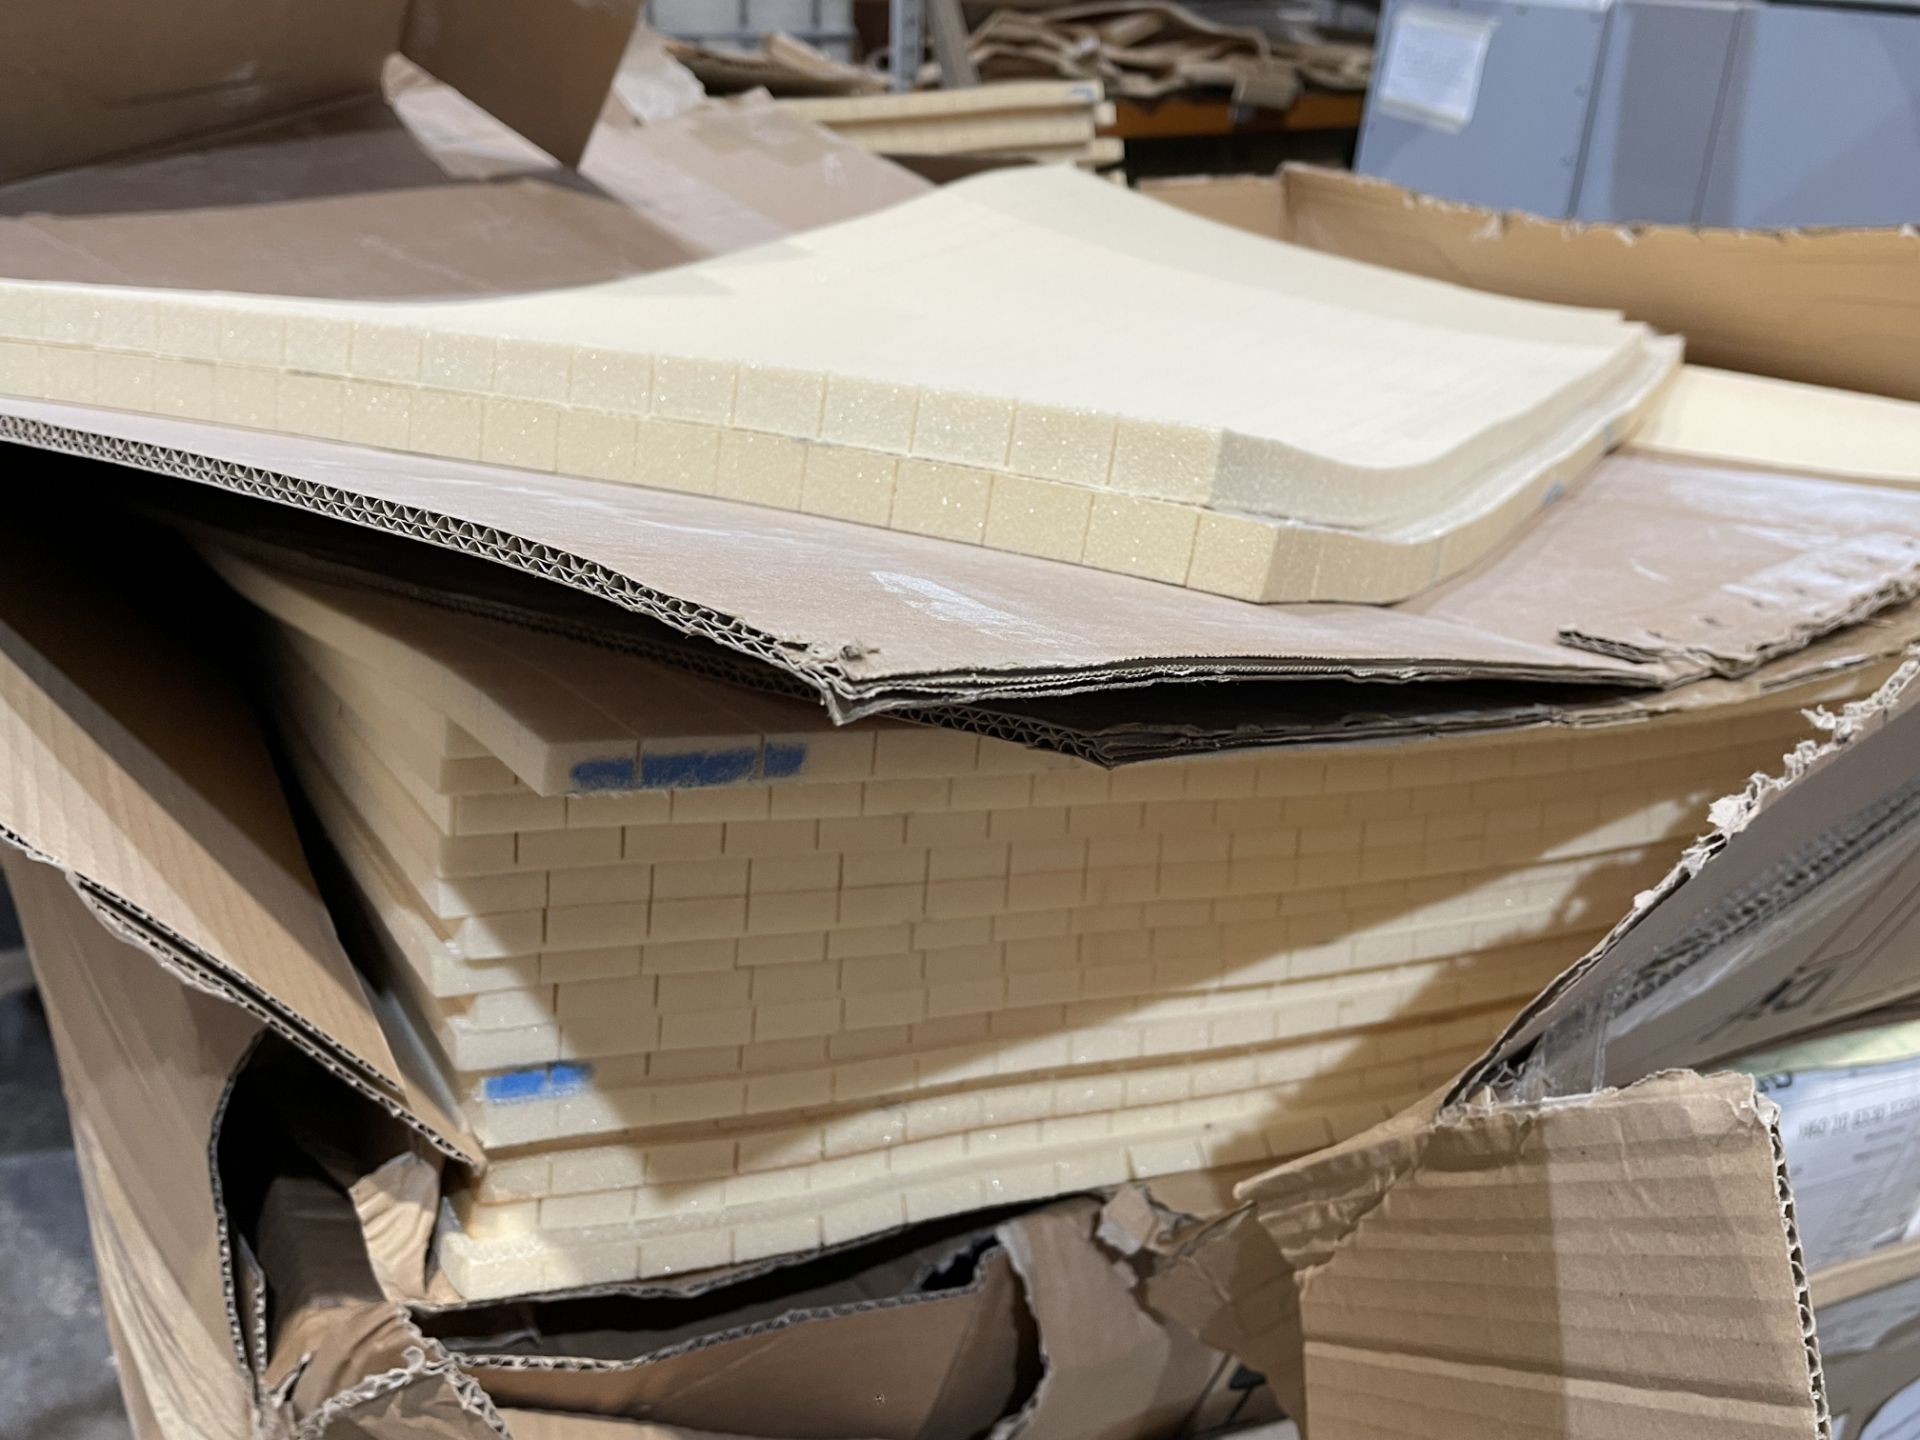 Large Quantity of Diab Divinycell Foam Core Sheets and Offcuts - Various Grades and Thicknesses to I - Image 10 of 17